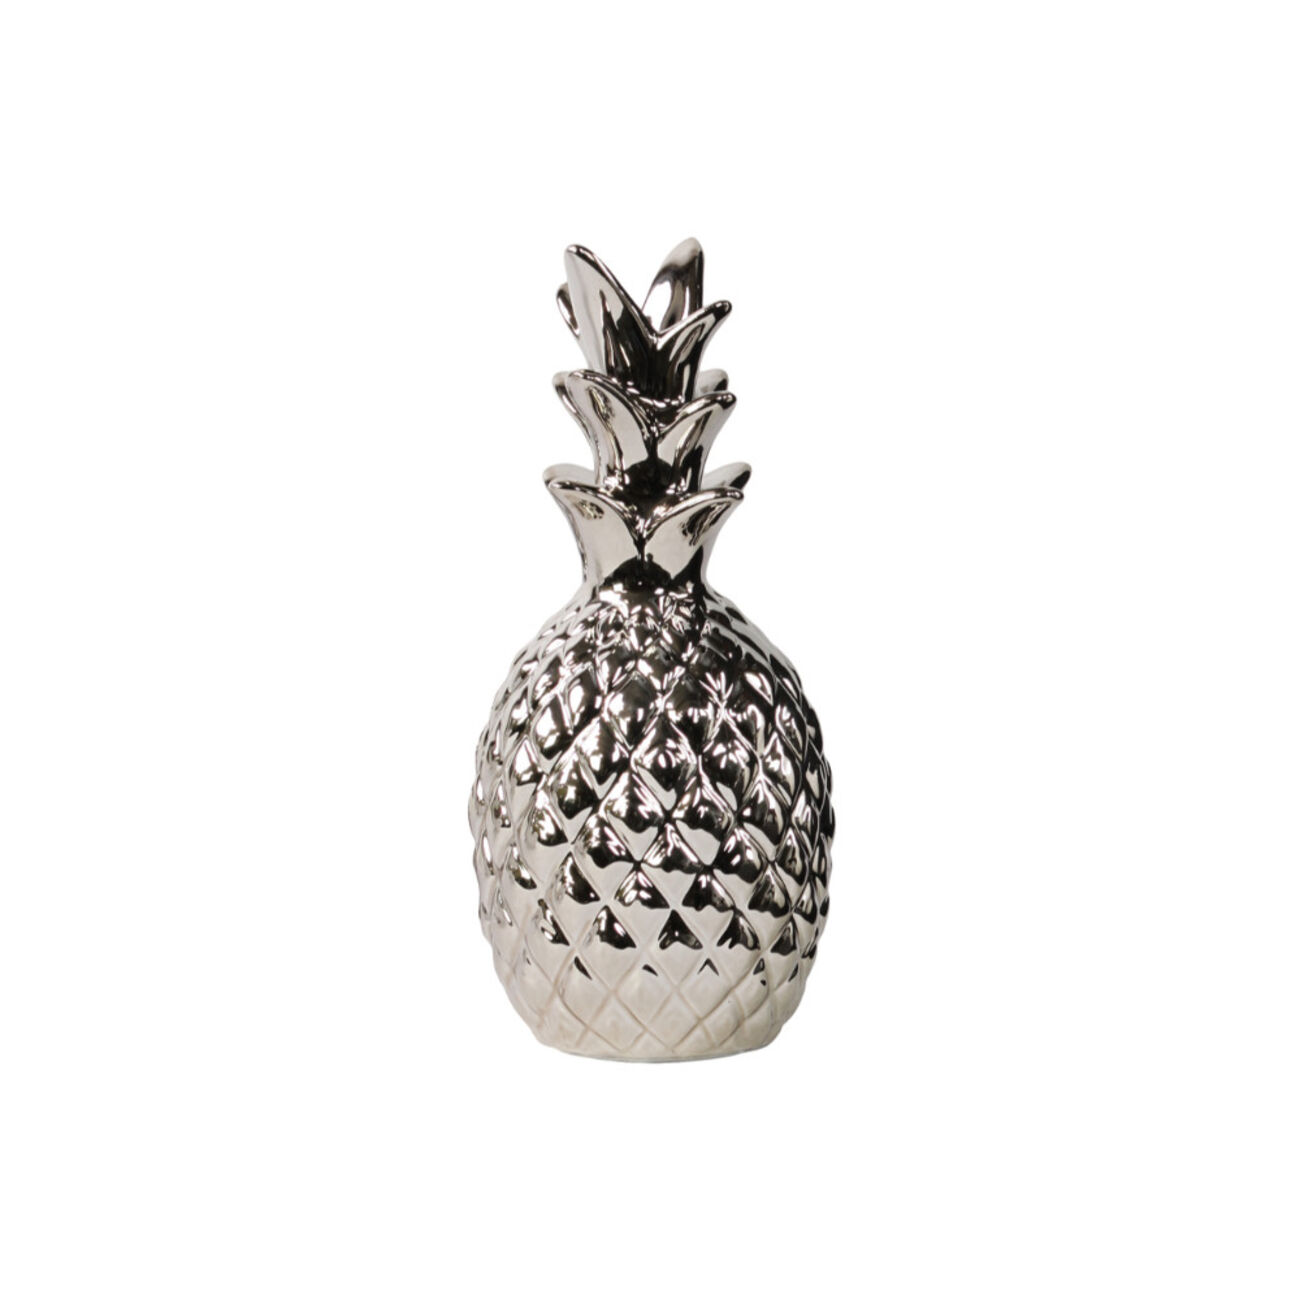 Polished Pineapple Figurine In Ceramic, Silver